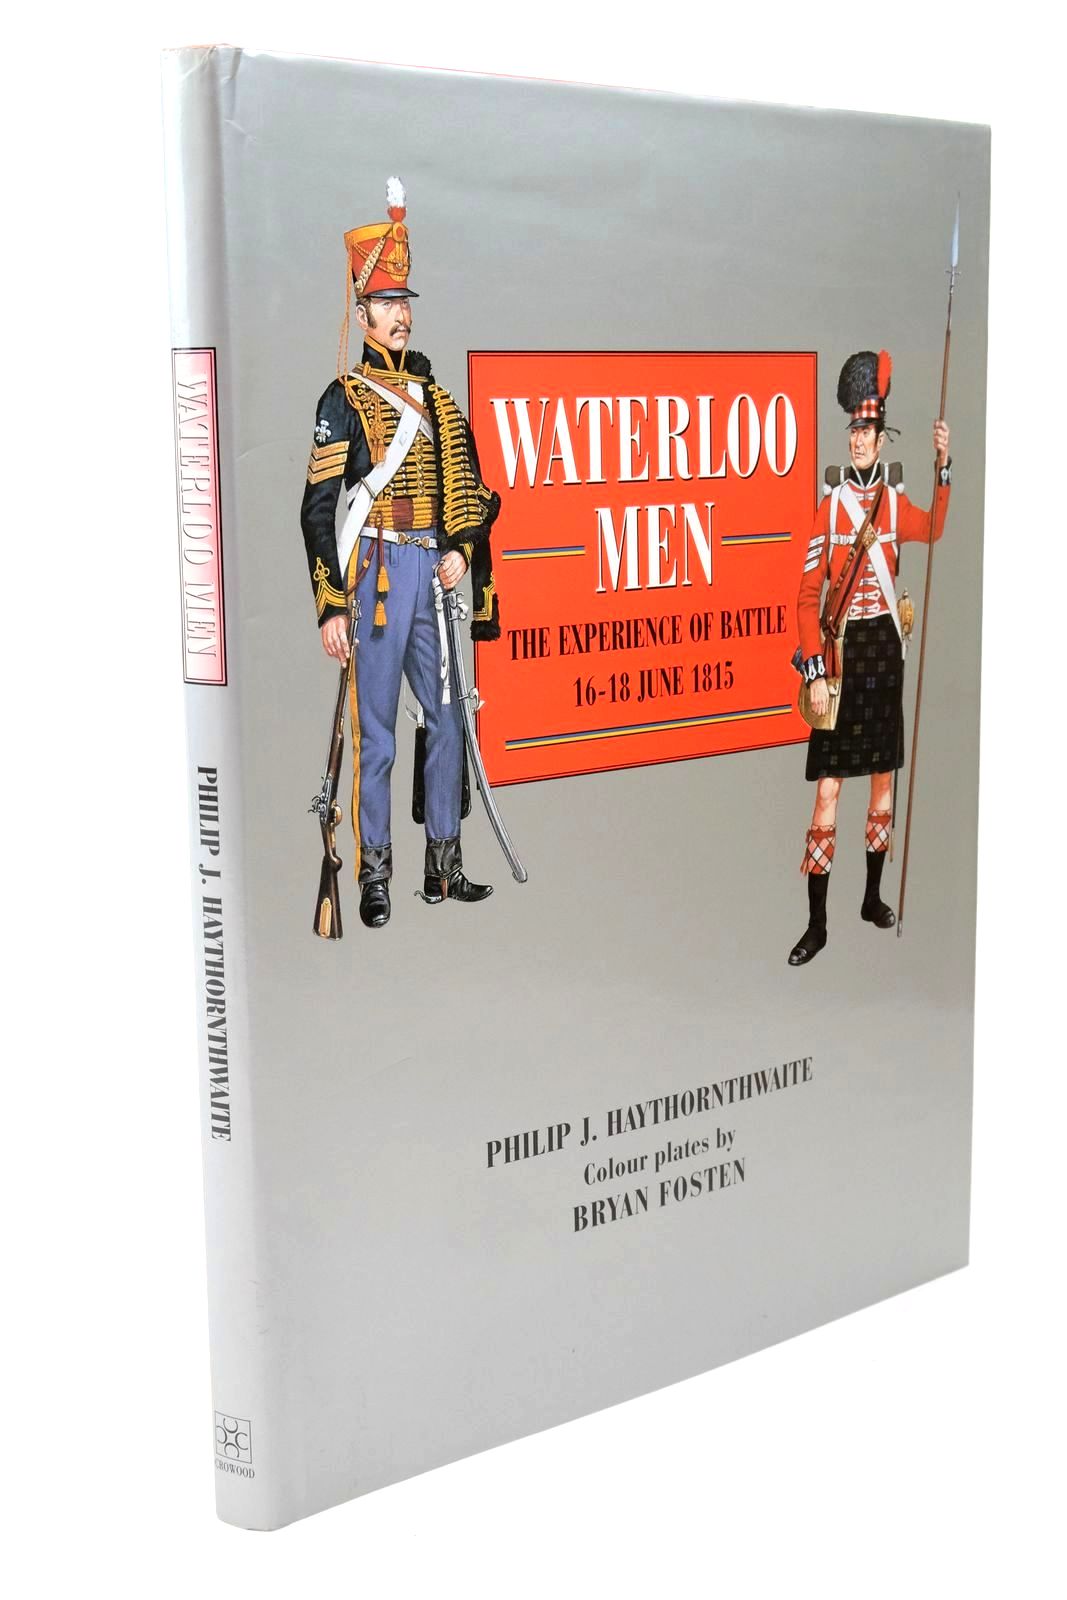 Photo of WATERLOO MEN: THE EXPERIENCE OF BATTLE 16-18 JUNE 1815- Stock Number: 1322630